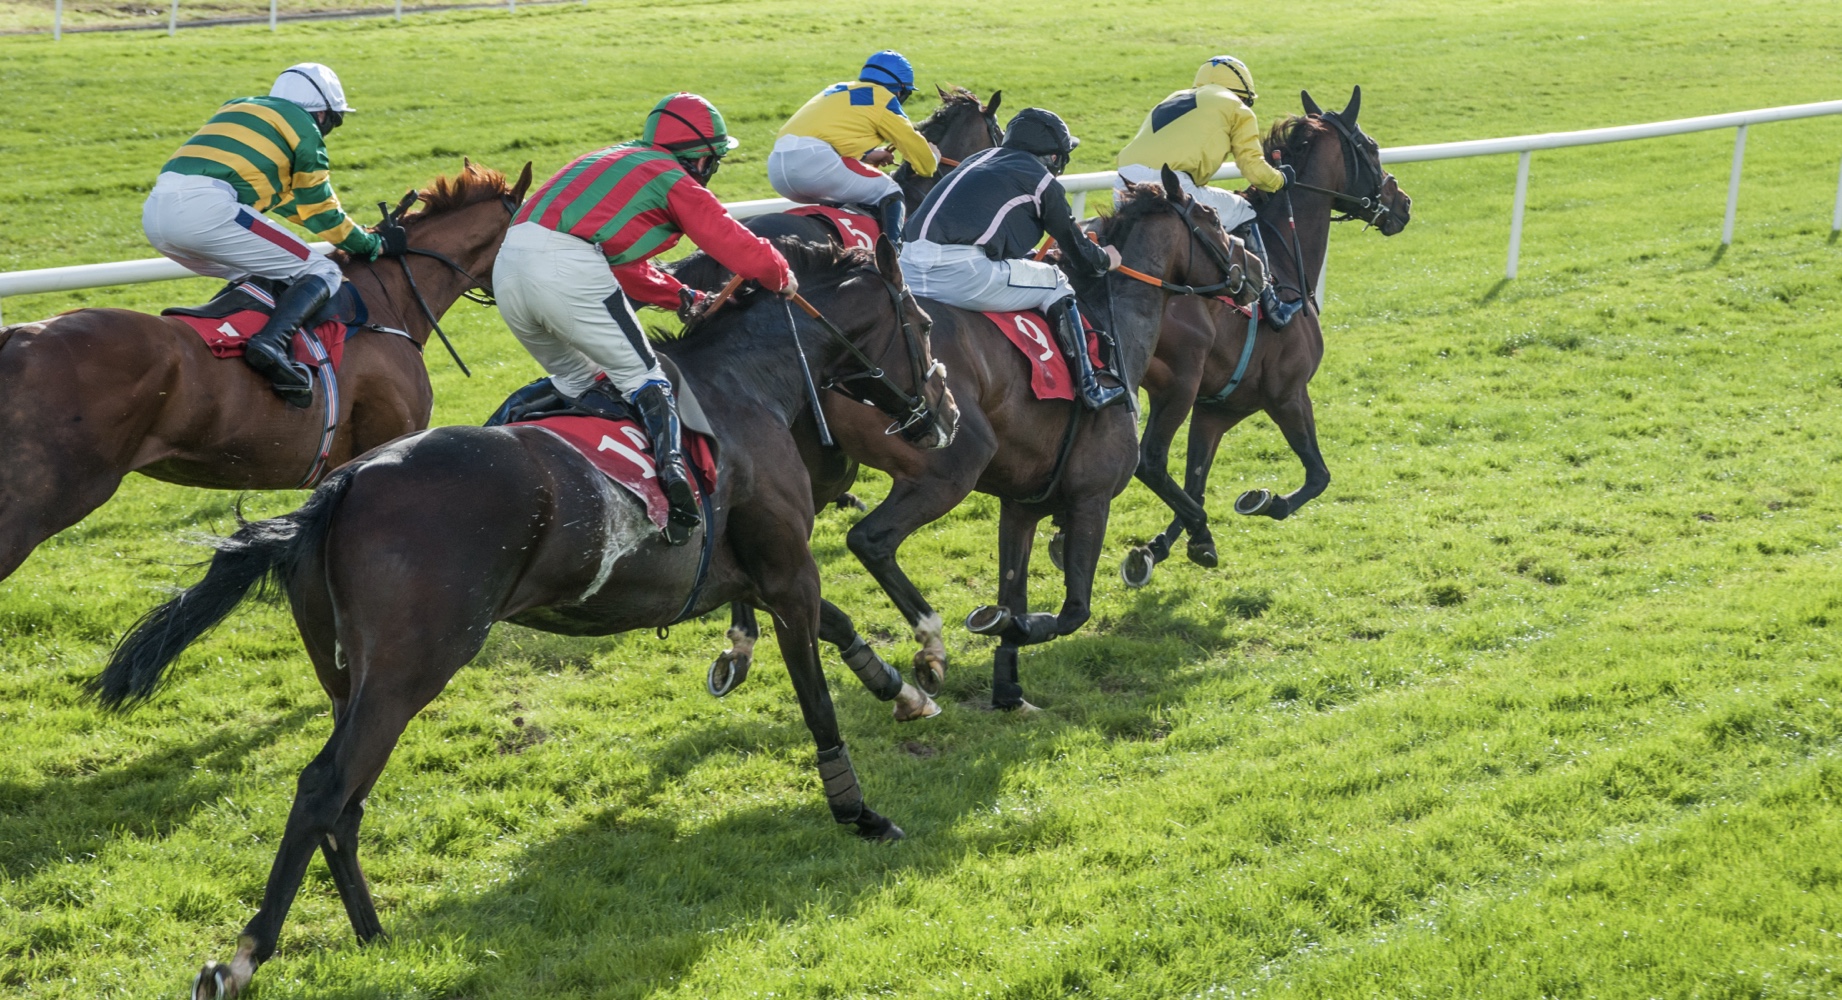 Five horses during race